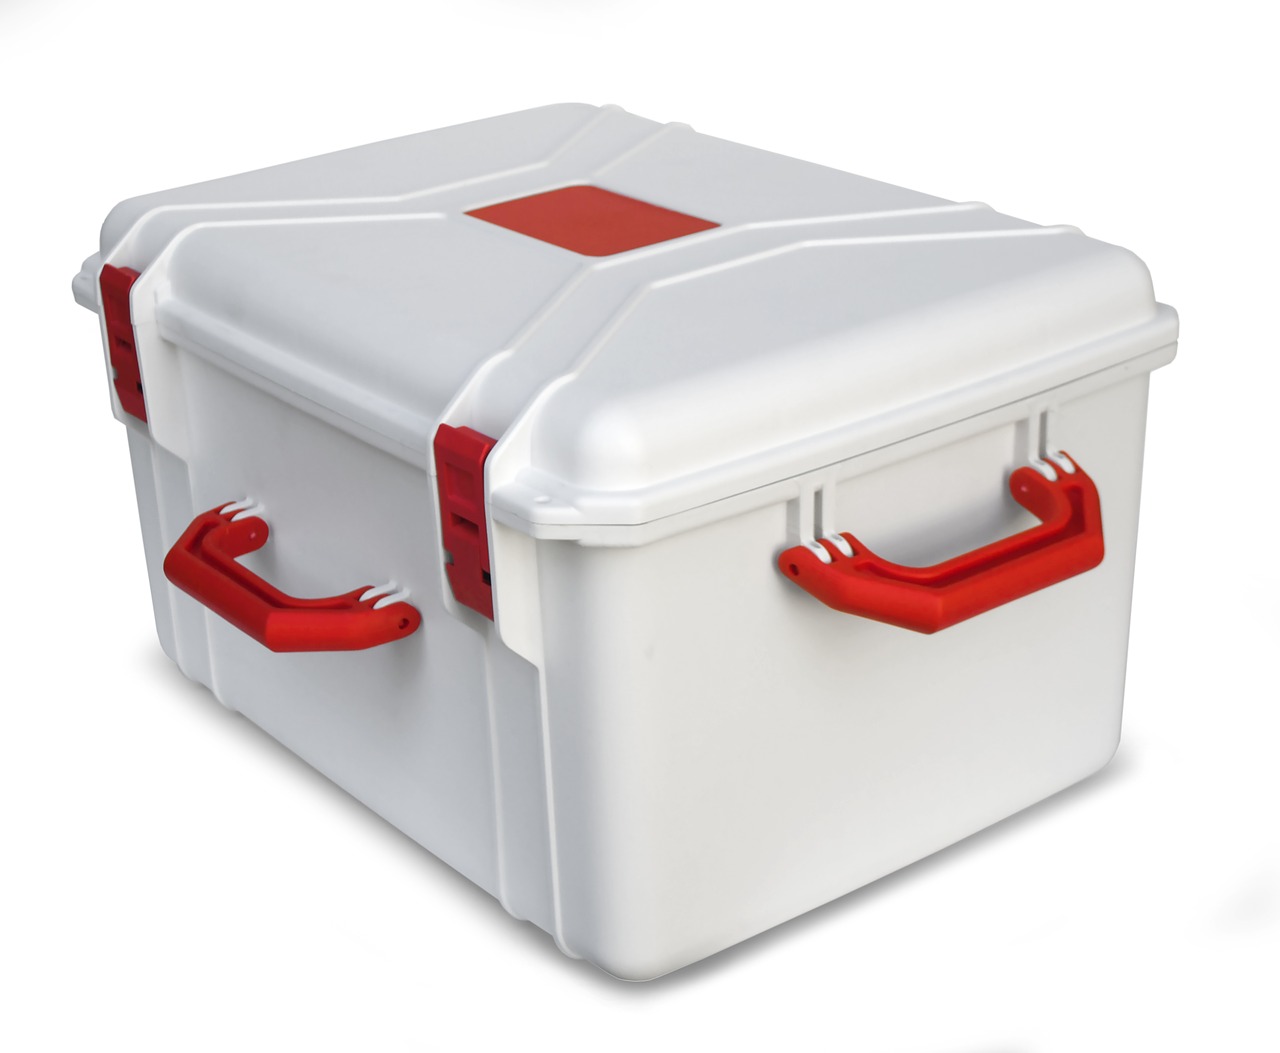 4 Reasons to Use Plastic Moving Containers or Rental Bins! - UtilityHound